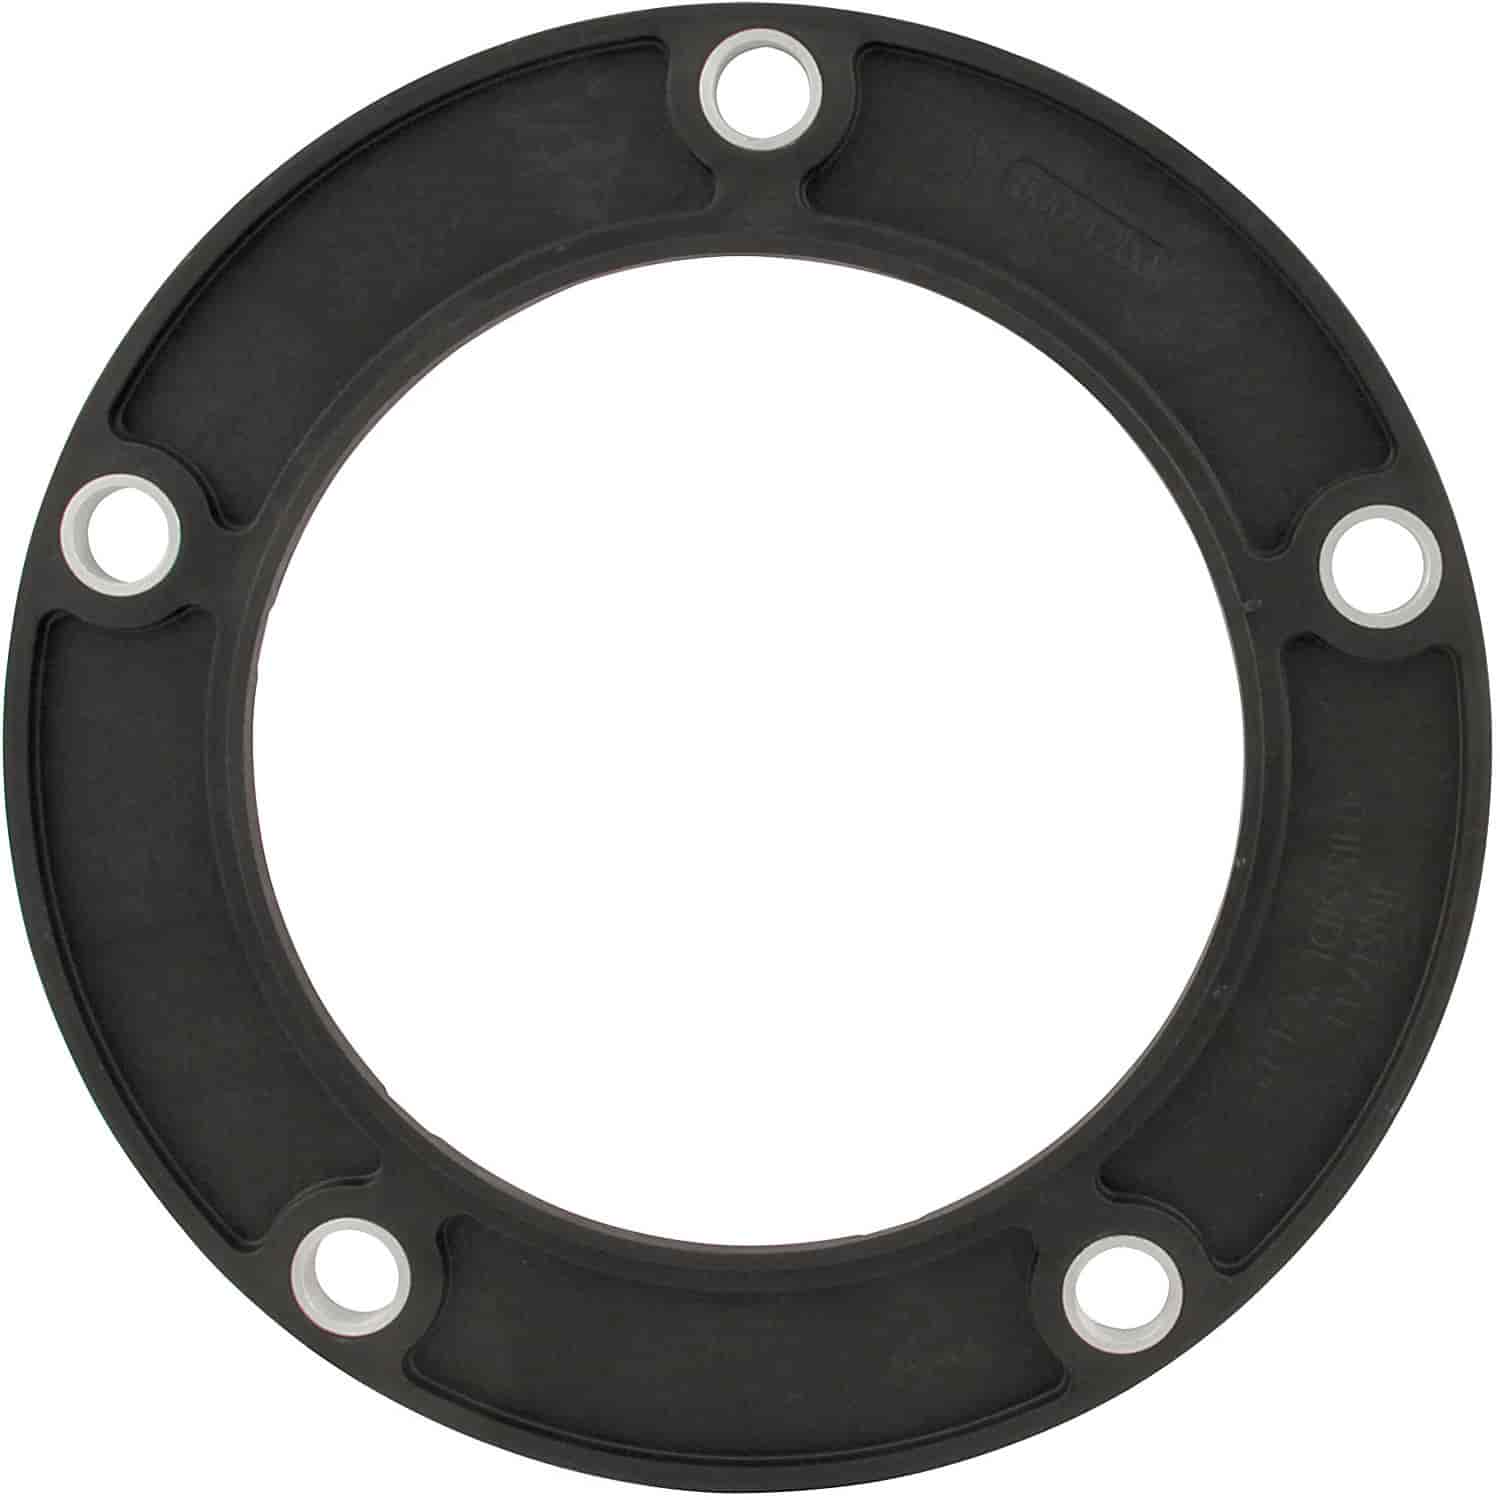 Plastic Wheel Spacer 1/2" Thick